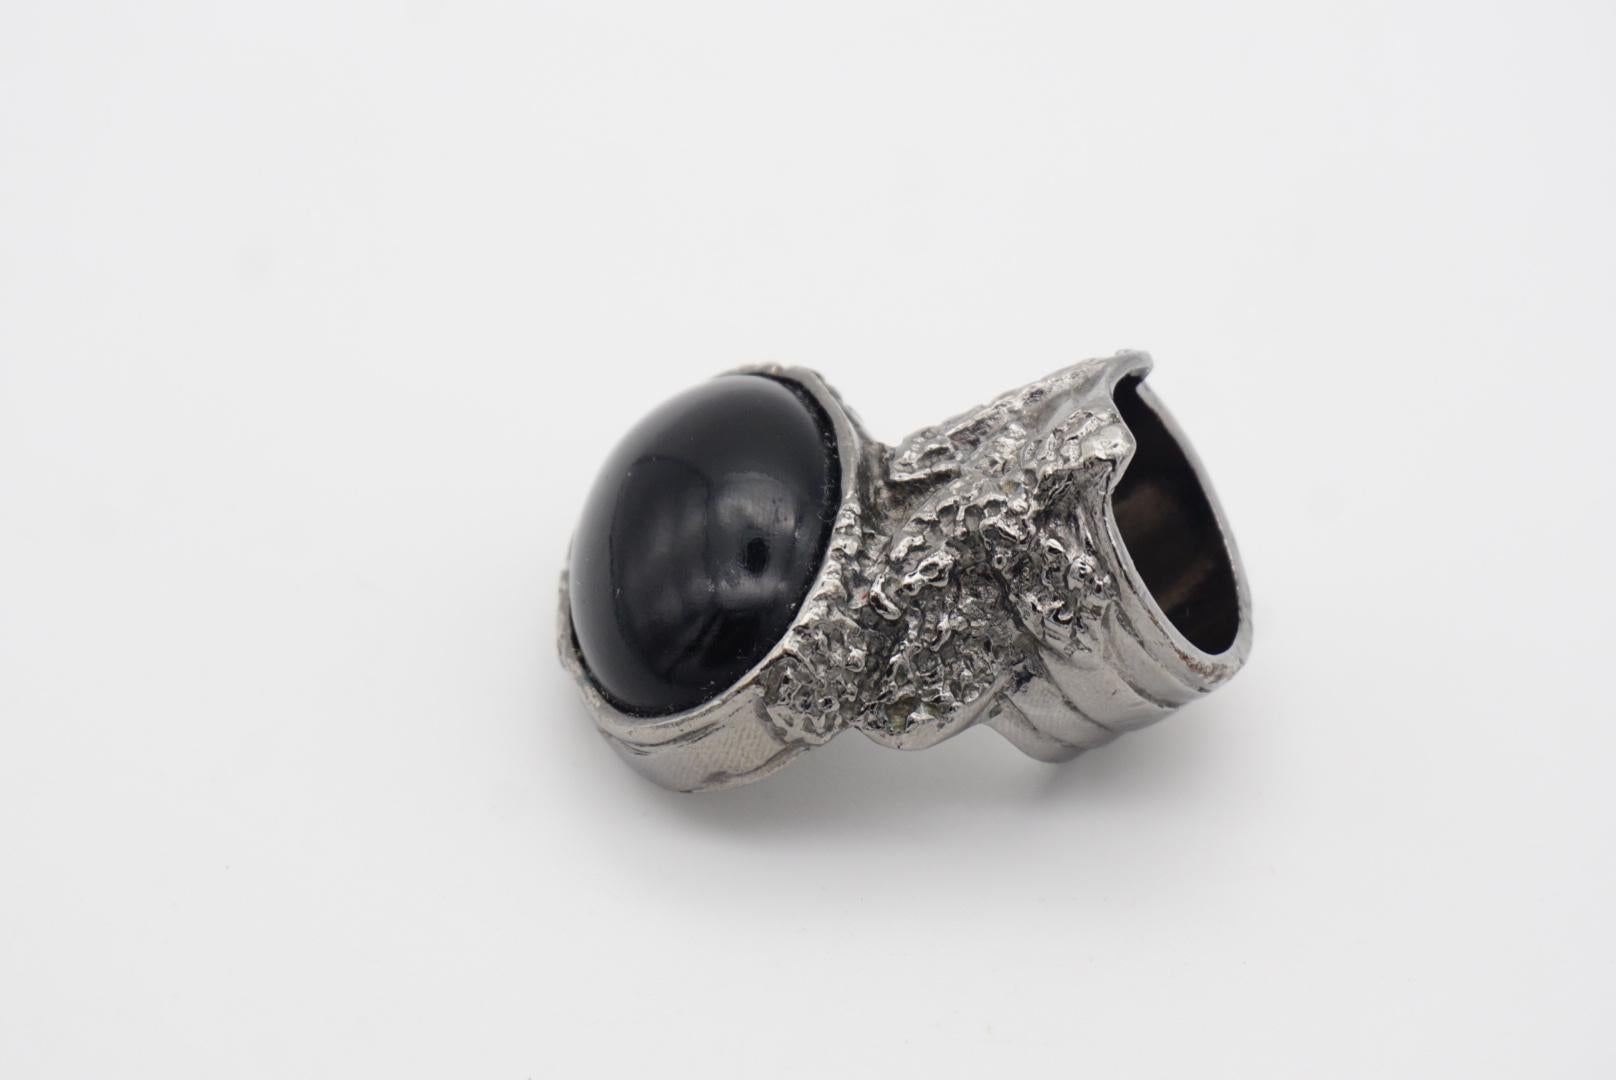 Yves Saint Laurent YSL Arty Black Cabochon Chunky Statement Silver Ring, Size 6 In Excellent Condition For Sale In Wokingham, England